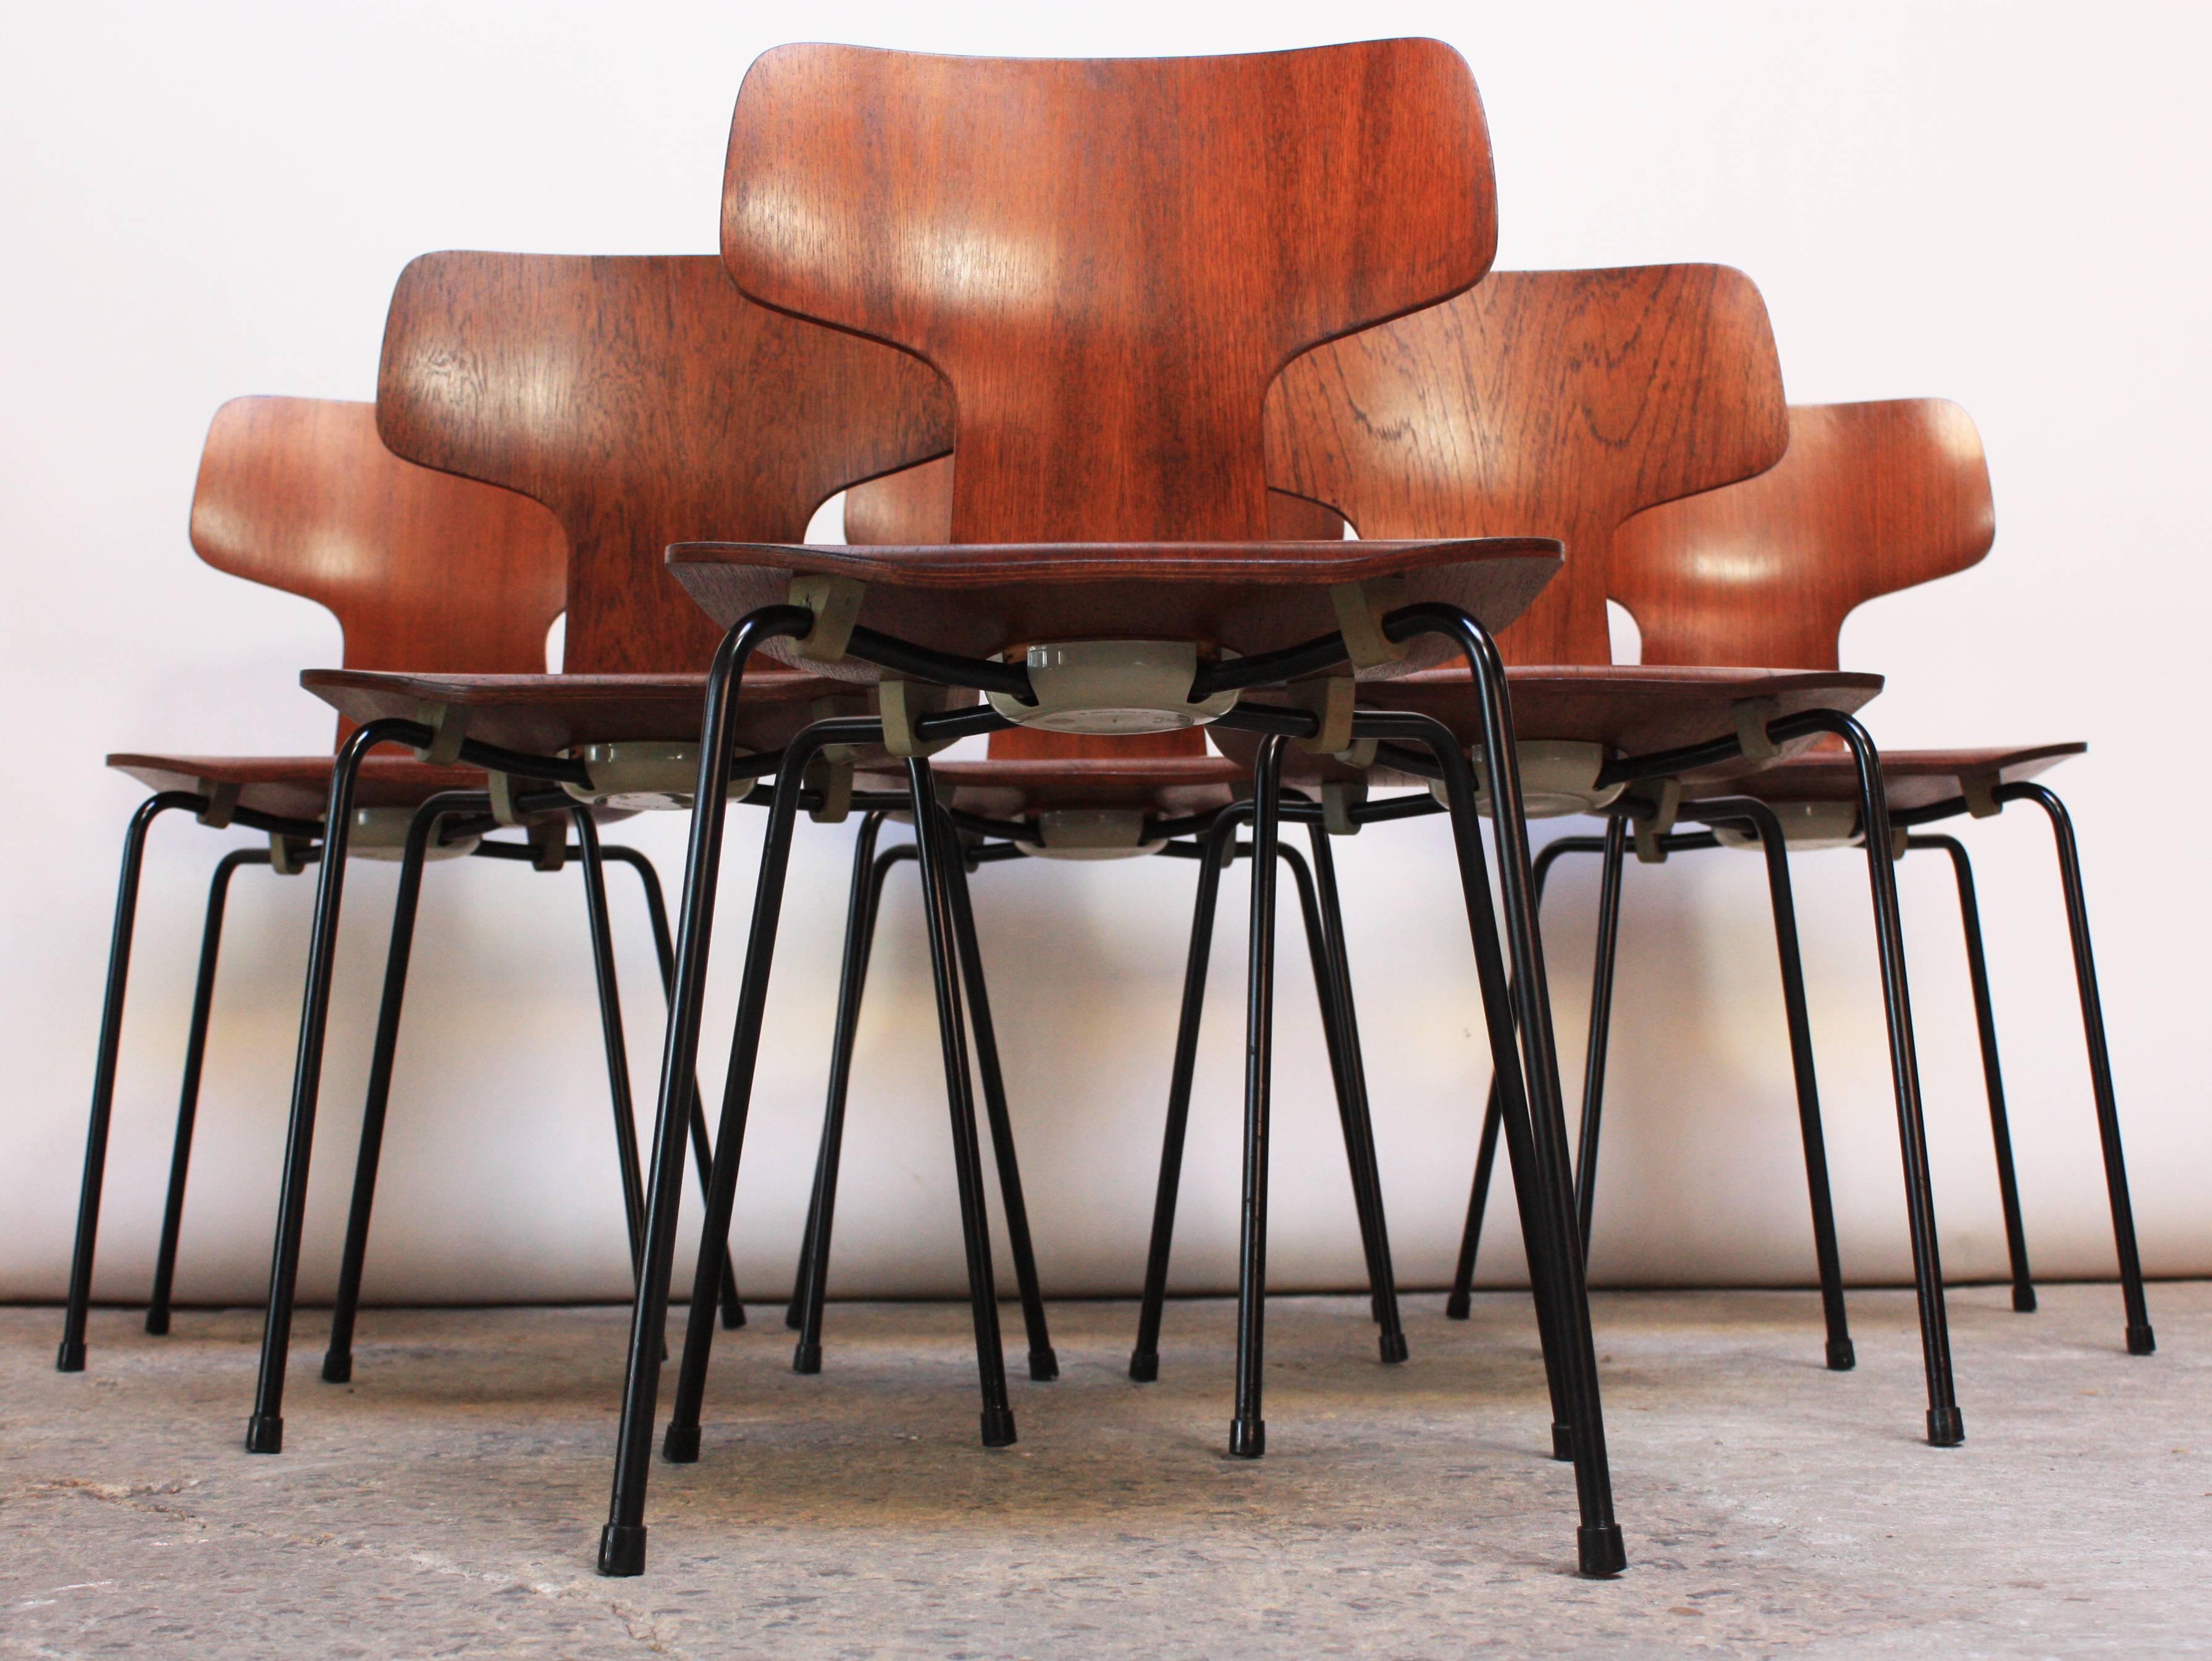 This set of six Arne Jacobsen for Fritz Hansen molded teakwood stacking chairs has been expertly restored. Each chair retains the original hardware (spacers, feet, and caps - branded with the Danish Control / Fritz Hansen markings). Additionally,